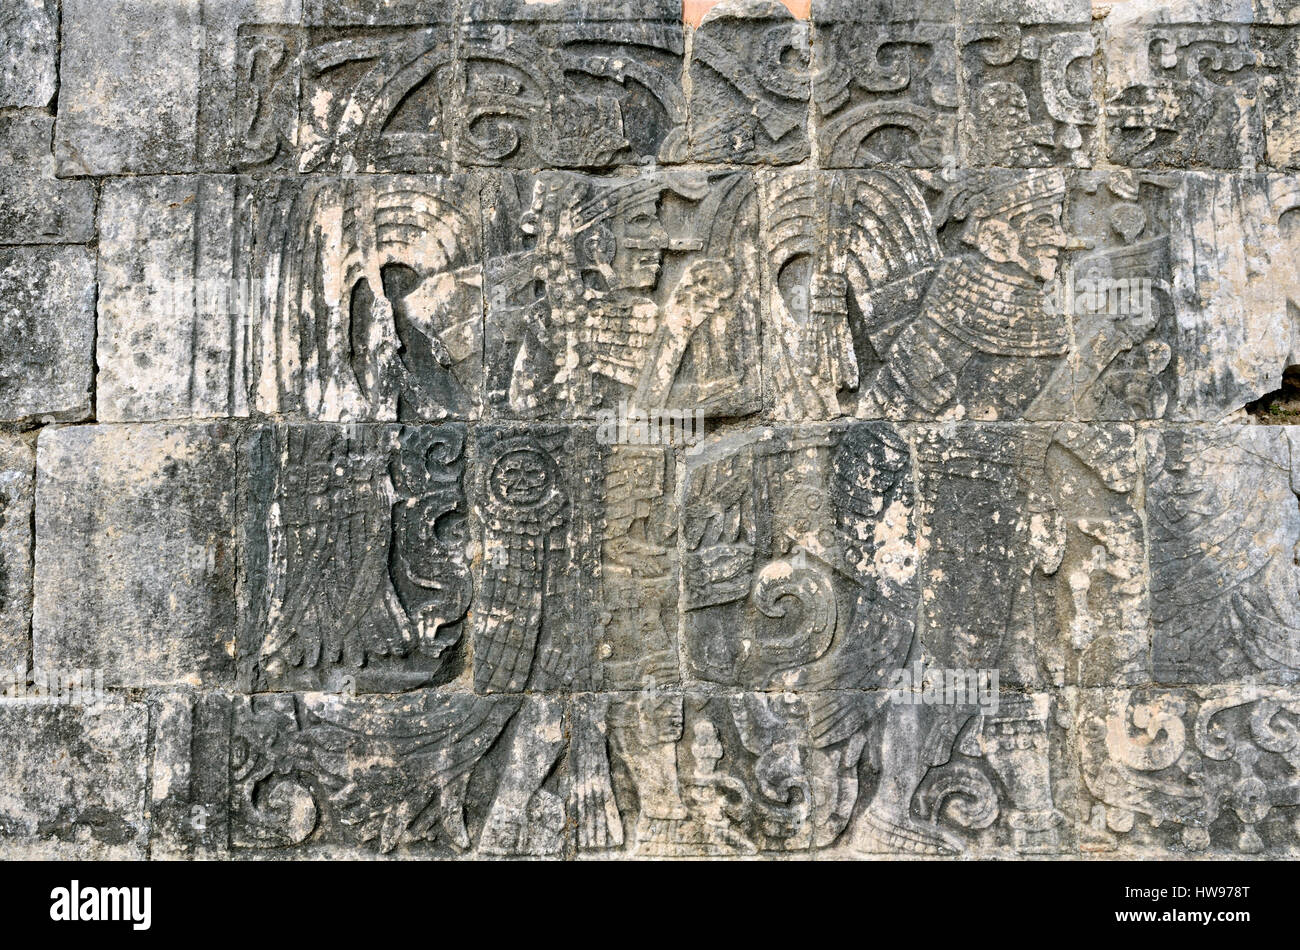 Bas-relief with human representations and symbols, ball court, historic Mayan city of Chichen Itza, Piste, Yucatan, Mexico Stock Photo